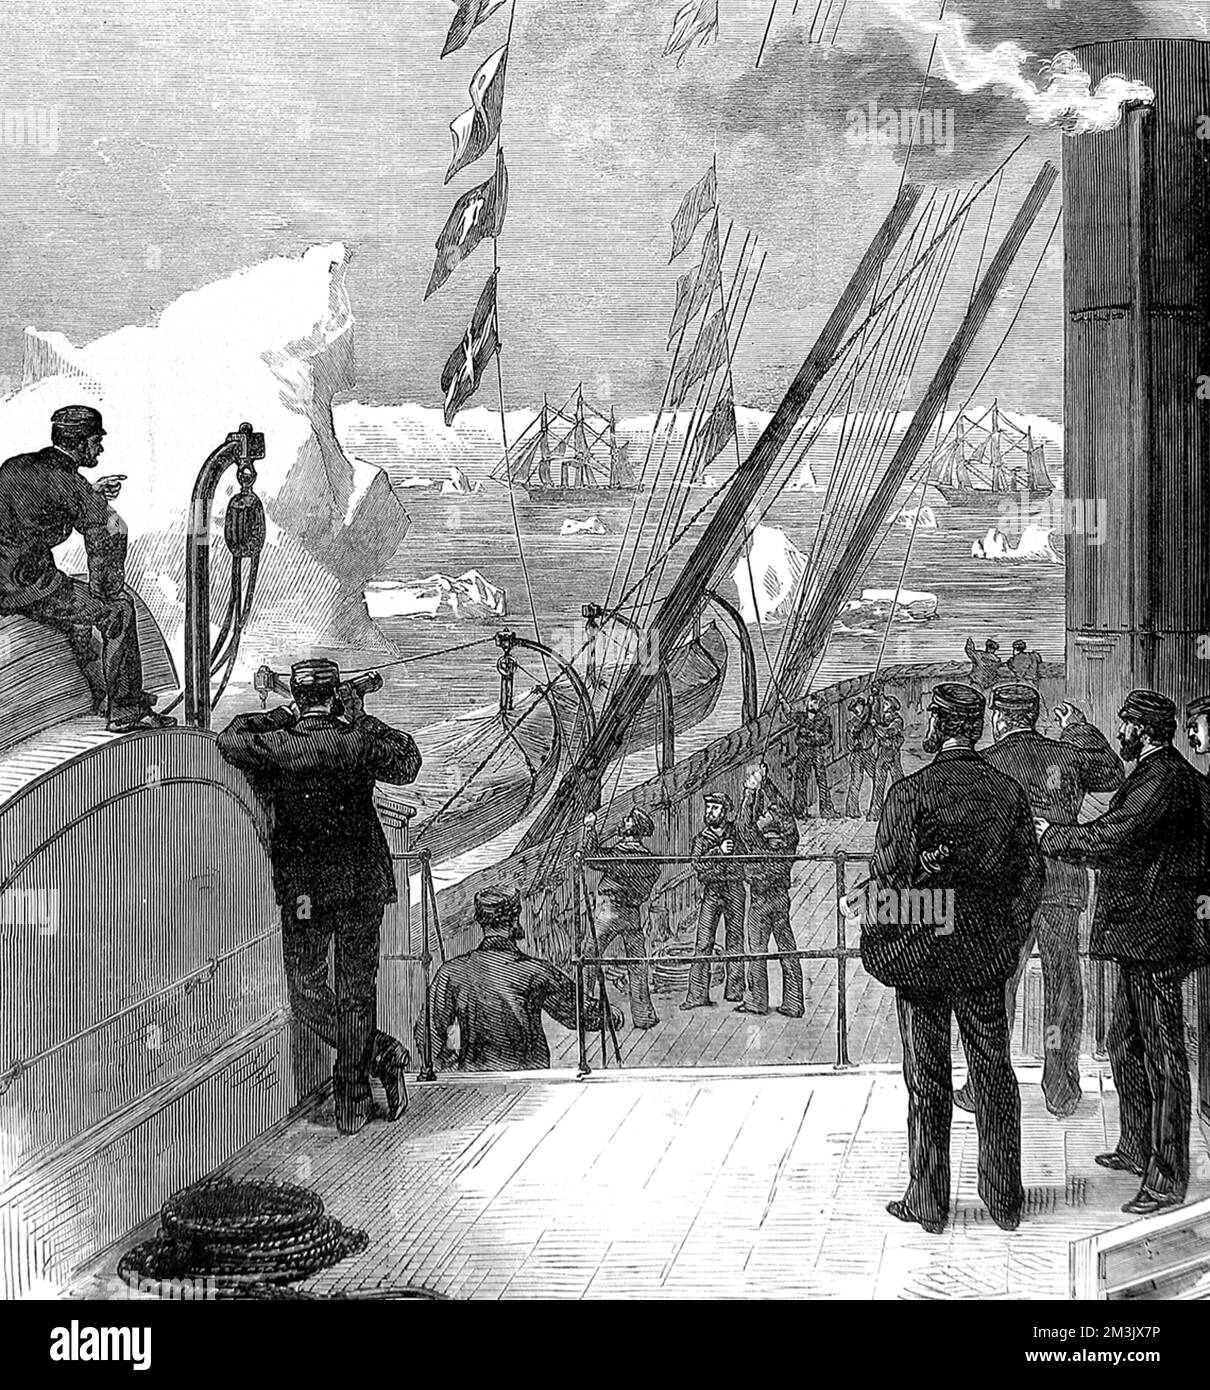 HMS 'Alert' and HMS 'Discovery' (both in the background) parting company with HMS 'Valorous' (foreground) at the beginning of the British Arctic Expedition of 1875-1876. The sailors on the deck of HMS 'Valorous' can be seen hoisting a farewell message.  In the summer of 1875 the British Admiralty sent Captain George Nares with two ships, HMS 'Alert' and HMS 'Discovery', to make an attempt to reach the North Pole via Smith Sound.   Although the attempt was unsuccessful, a new 'furthest North' record was set, the coasts of Greenland and Ellesmere Island were charted and much scient Stock Photo